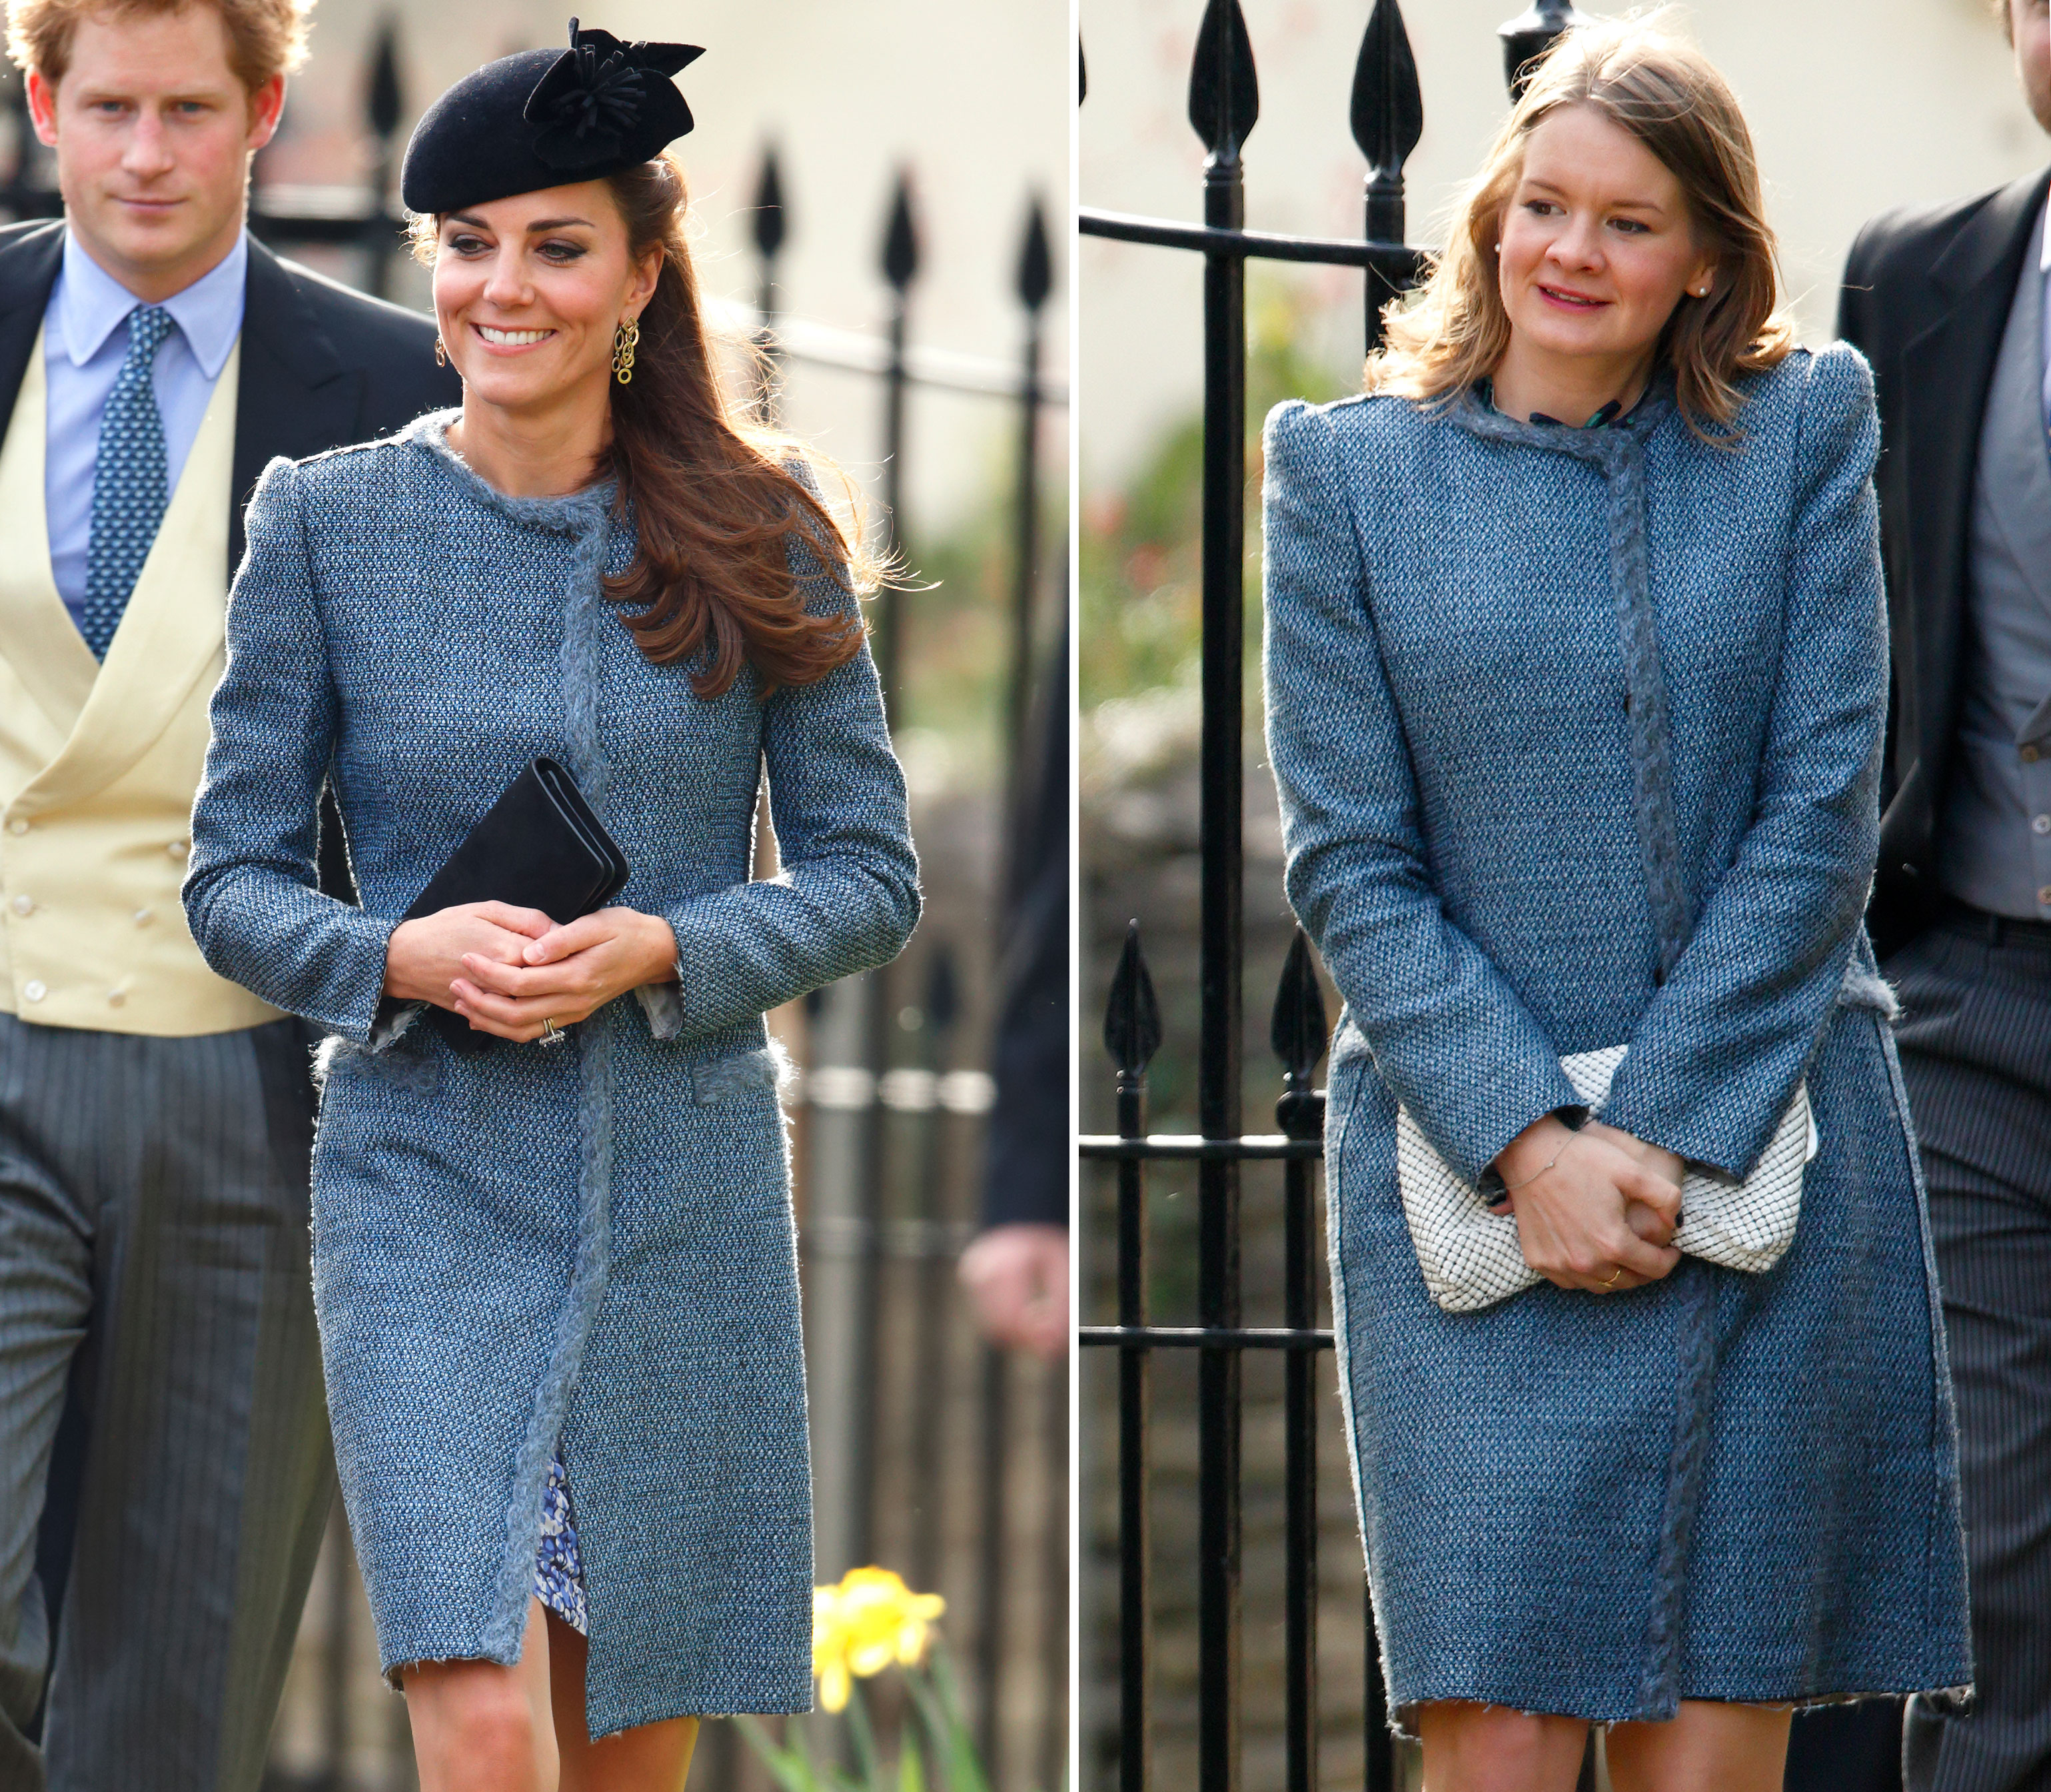 From left: Catherine, Duchess of Cambridge and a fellow guest wearing the same Missoni coat attend the wedding of Lucy Meade and Charlie Budgett at the church of St Mary the Virgin, Marshfield on March 29, 2014 in Chippenham, England.